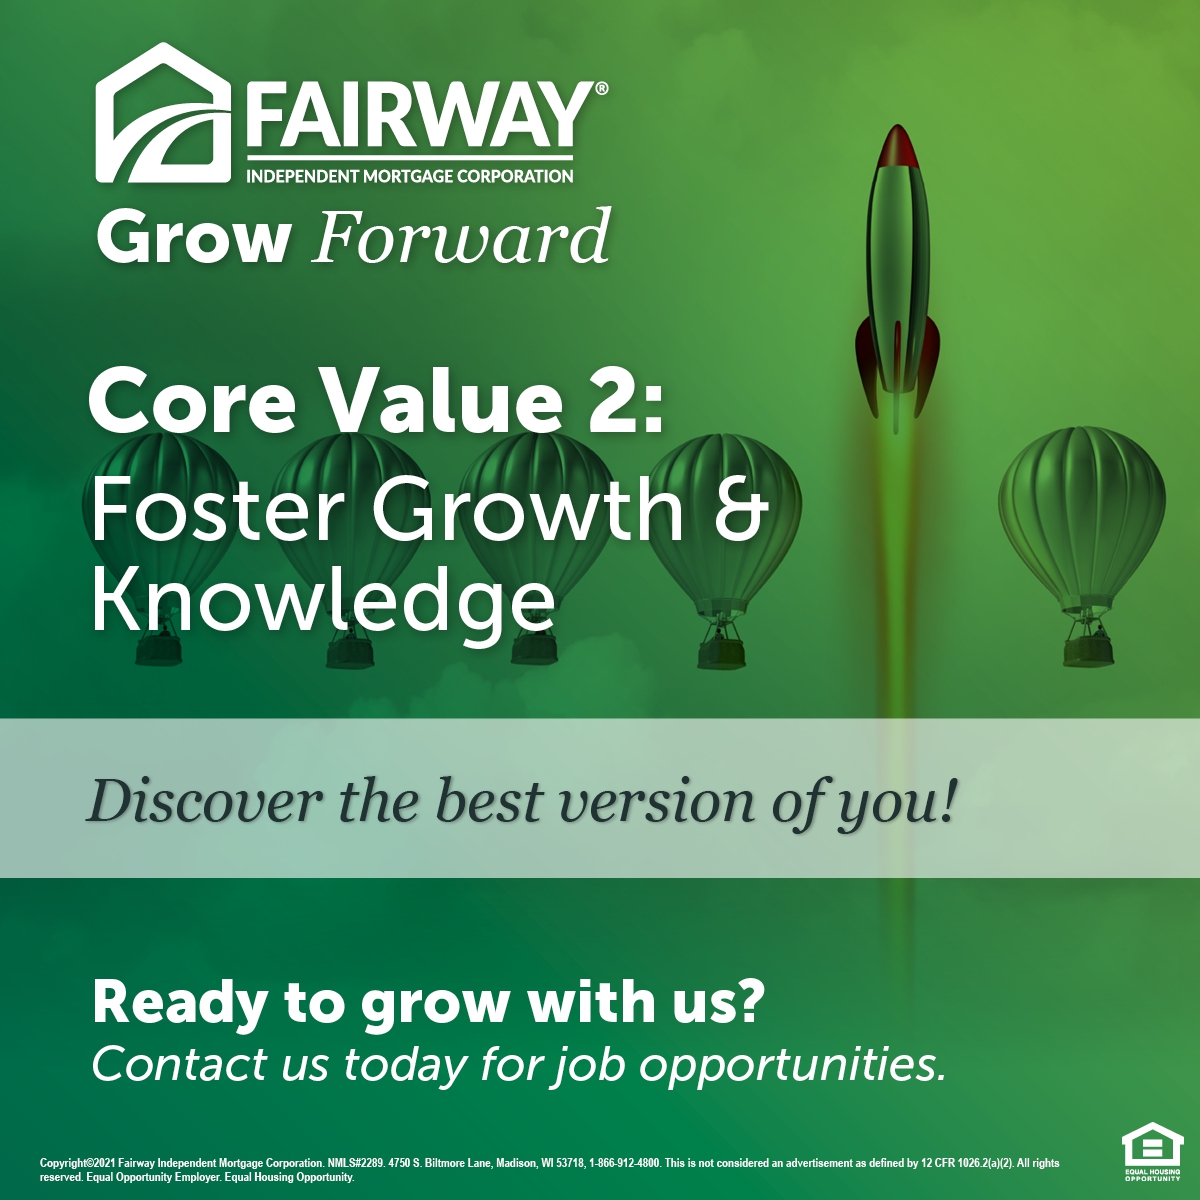 The second #CoreValue of #FairwayIndependentMortgage is to discover the BEST version of YOU!